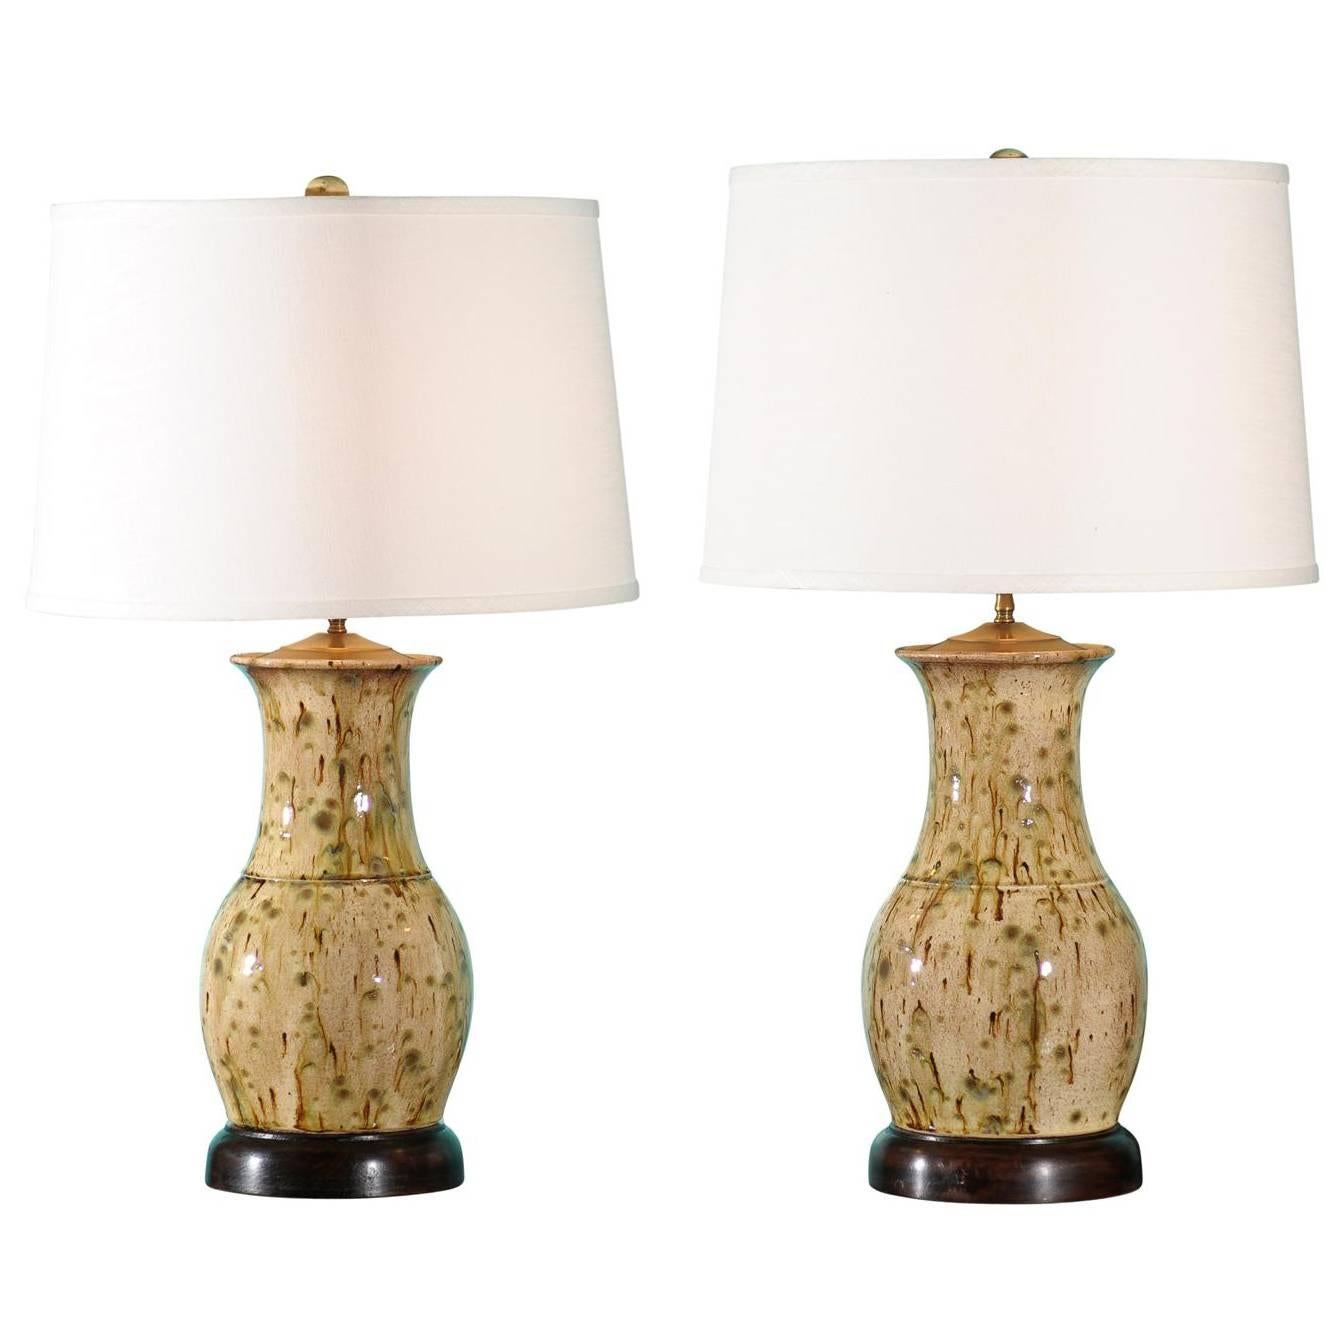 Pair of Charlie West Lamps